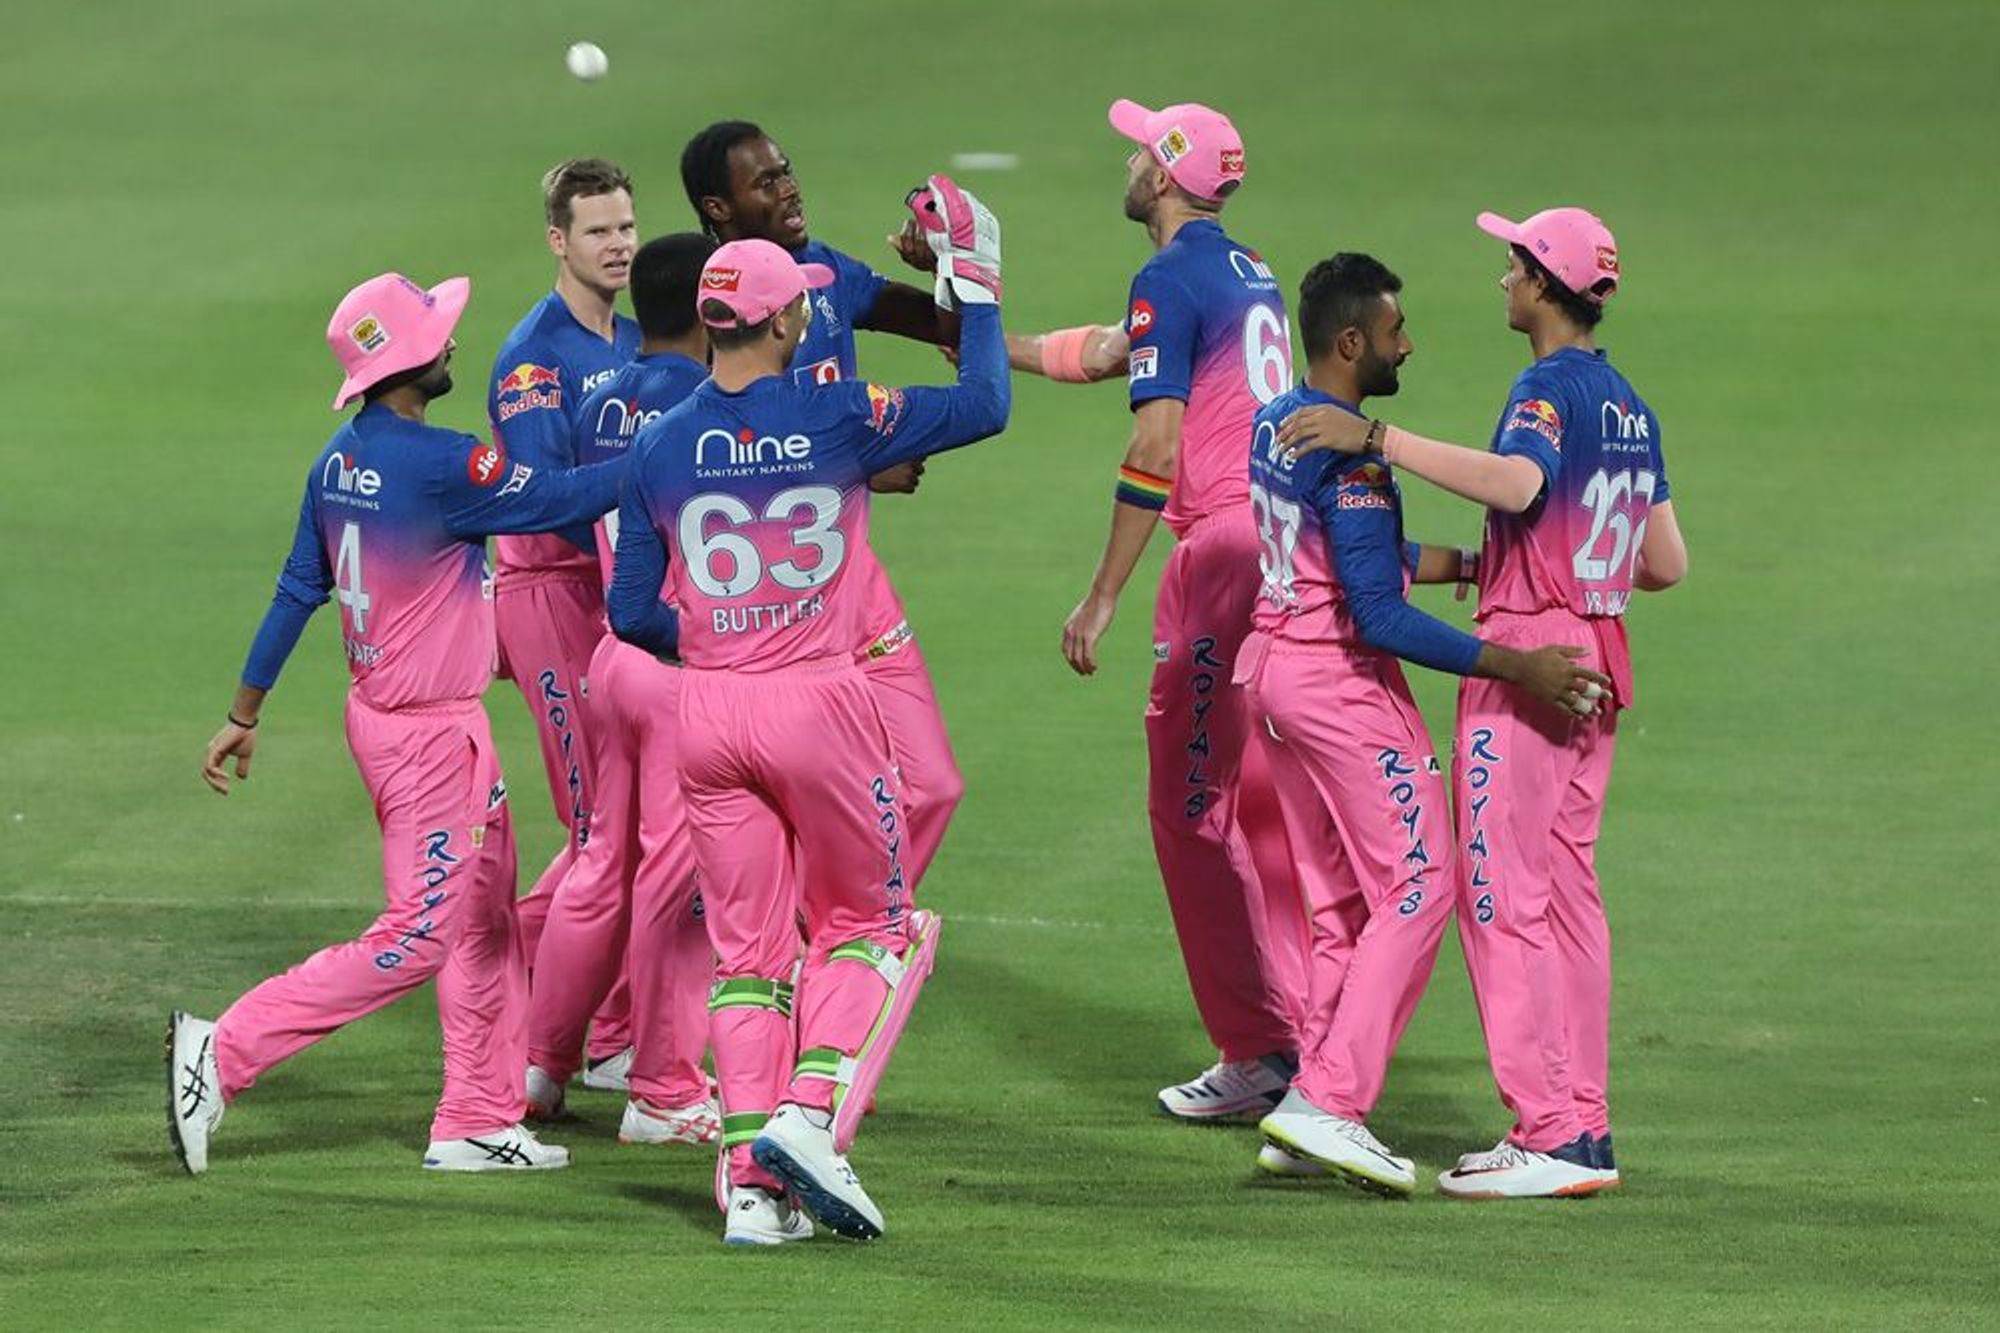 IPL 2020 | Rajasthan seem to have everyone in the right role, opines Shaun Pollock